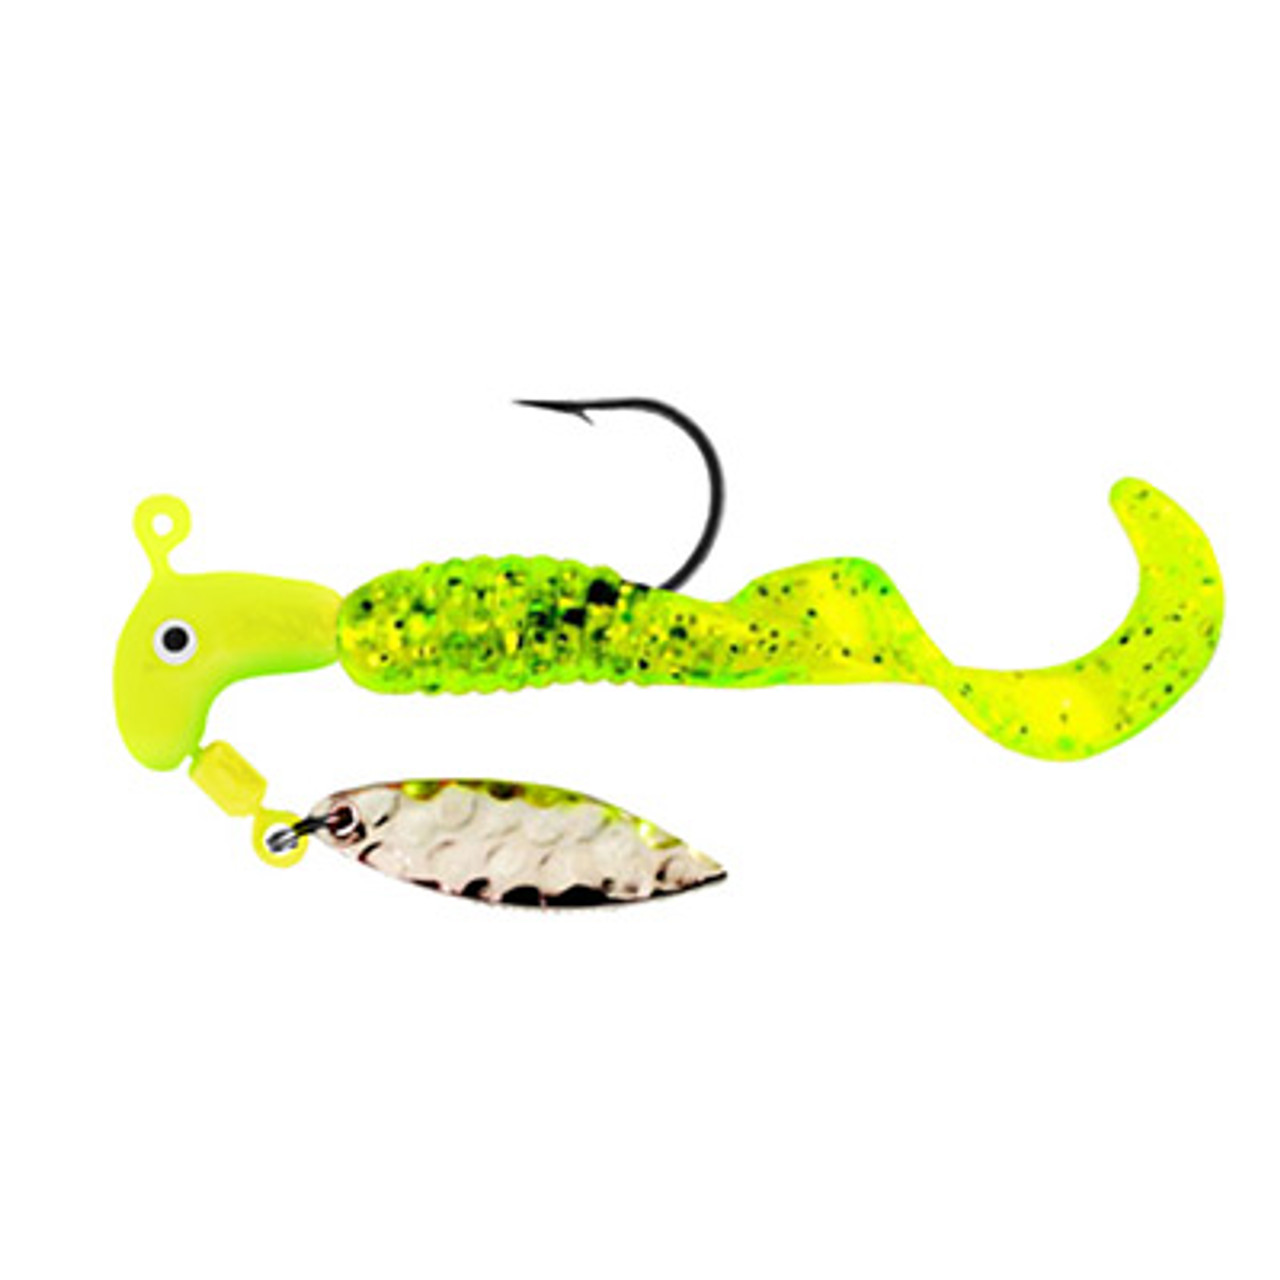 Road Runner 1654-012 Pro Series Curly Tail Jig w/Spinner, 1/4 oz